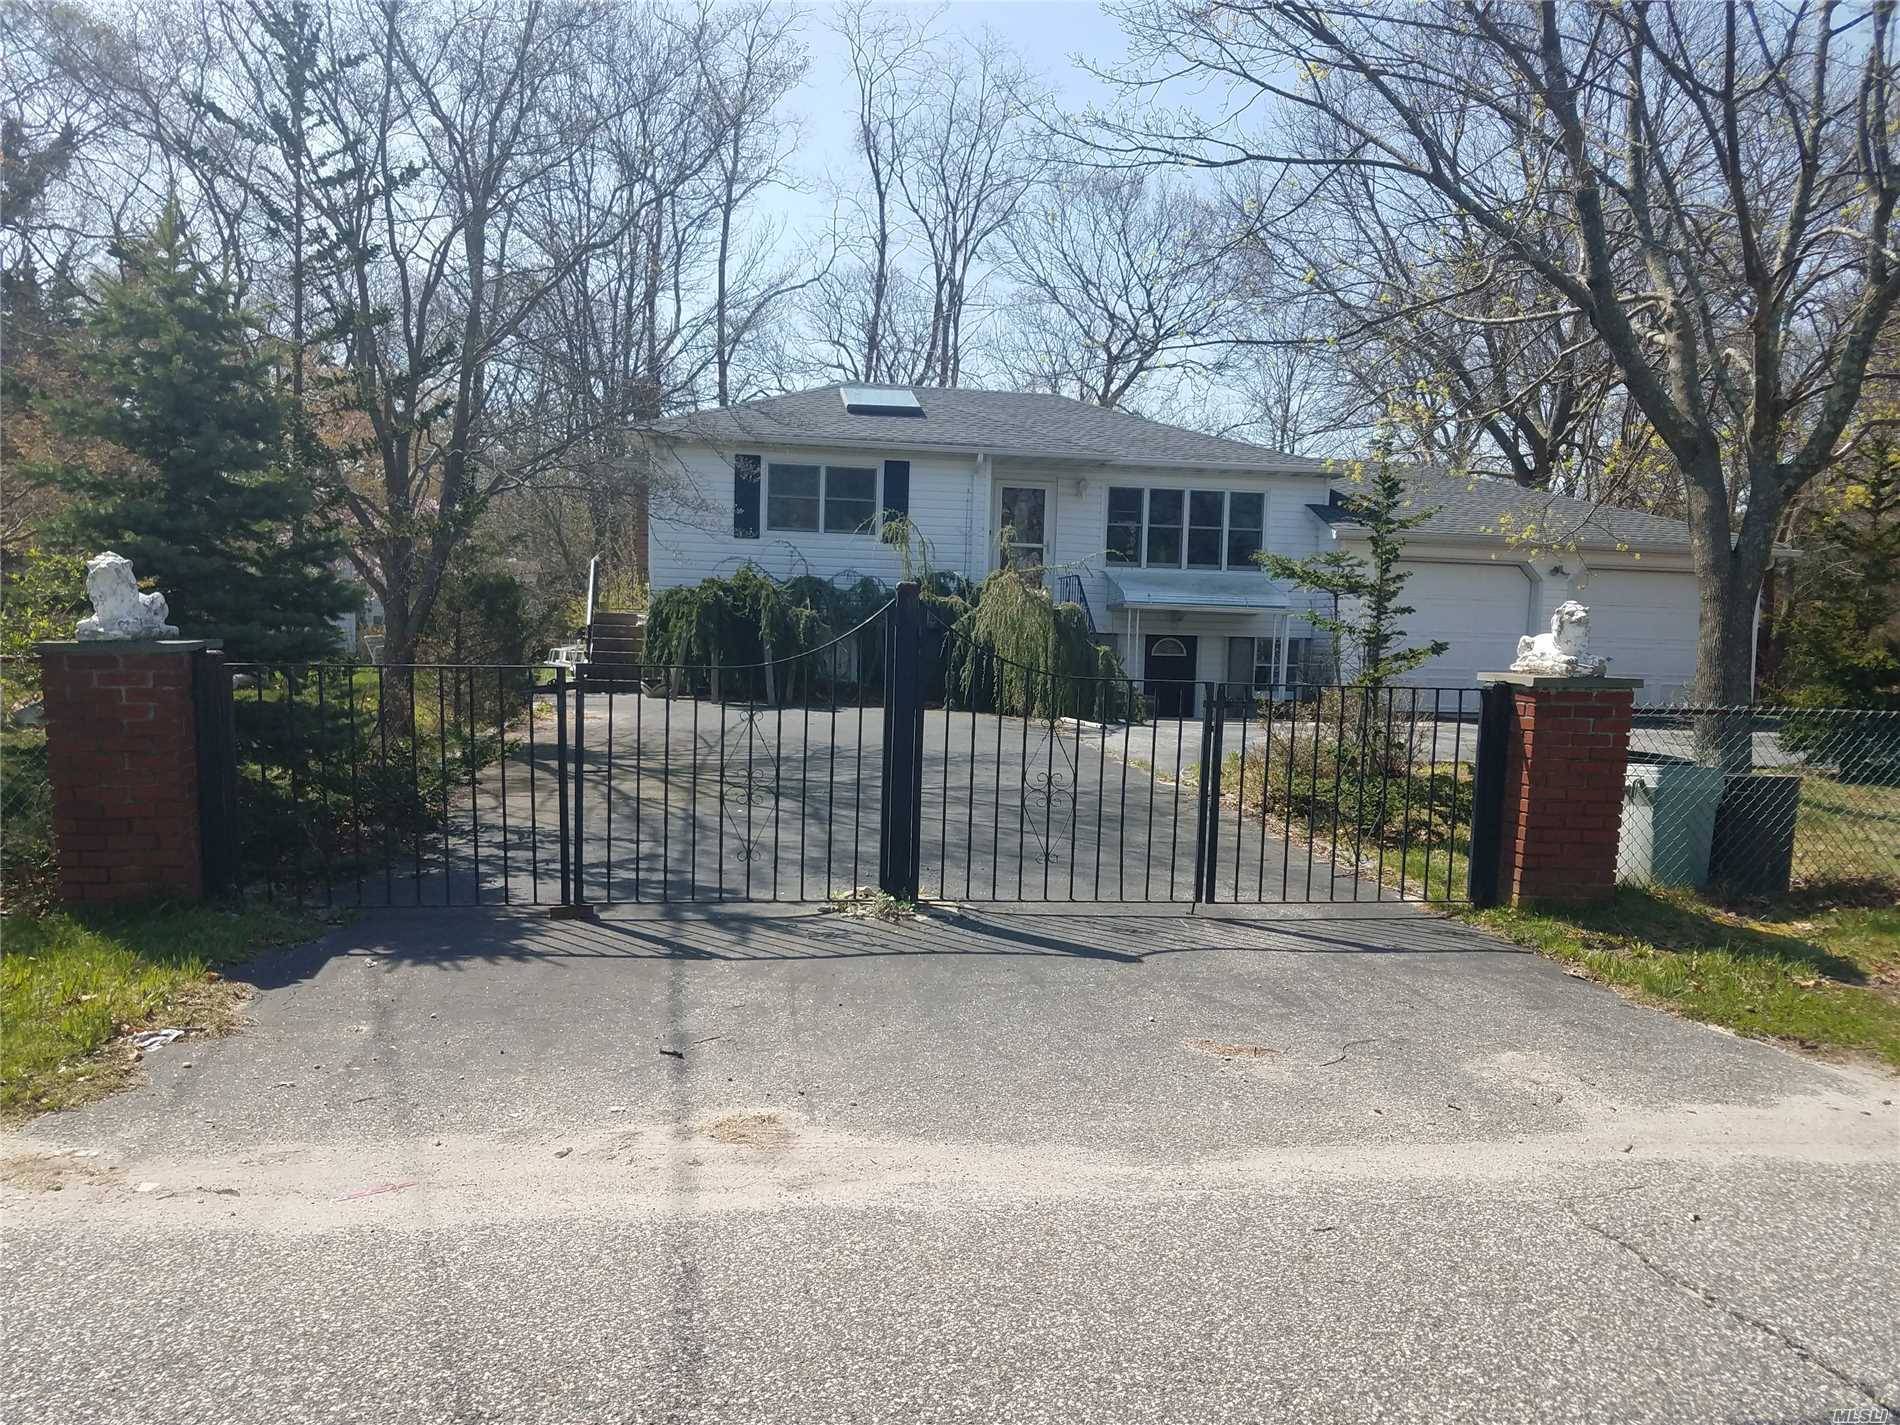 1887 Sf Ranch With 2 Car Attached Garage On 100 X 148 Lot Size Being Sold With 3 Adjoining Lots, A Separate Cottage With Enclosed Sunroom, Huge Driveway, Fenced Yard, ...